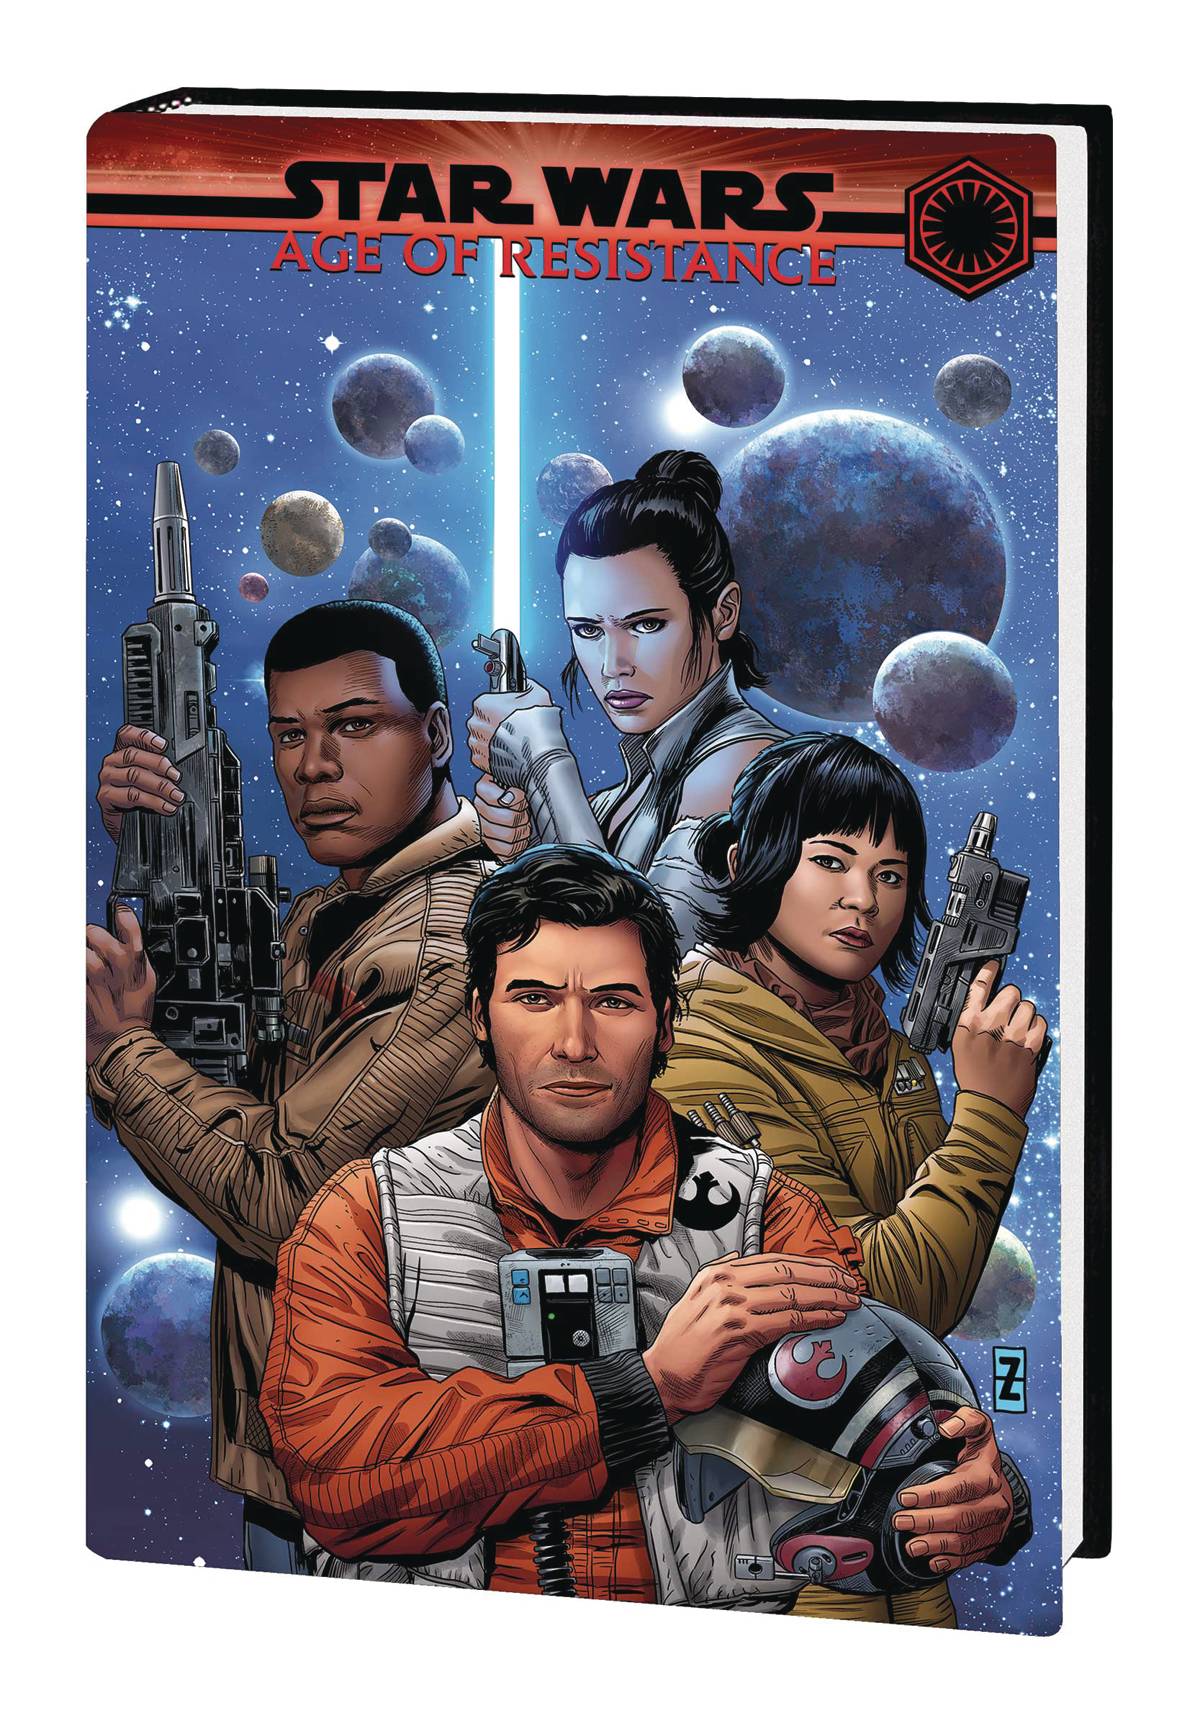 Star Wars Age of Resistance Hardcover